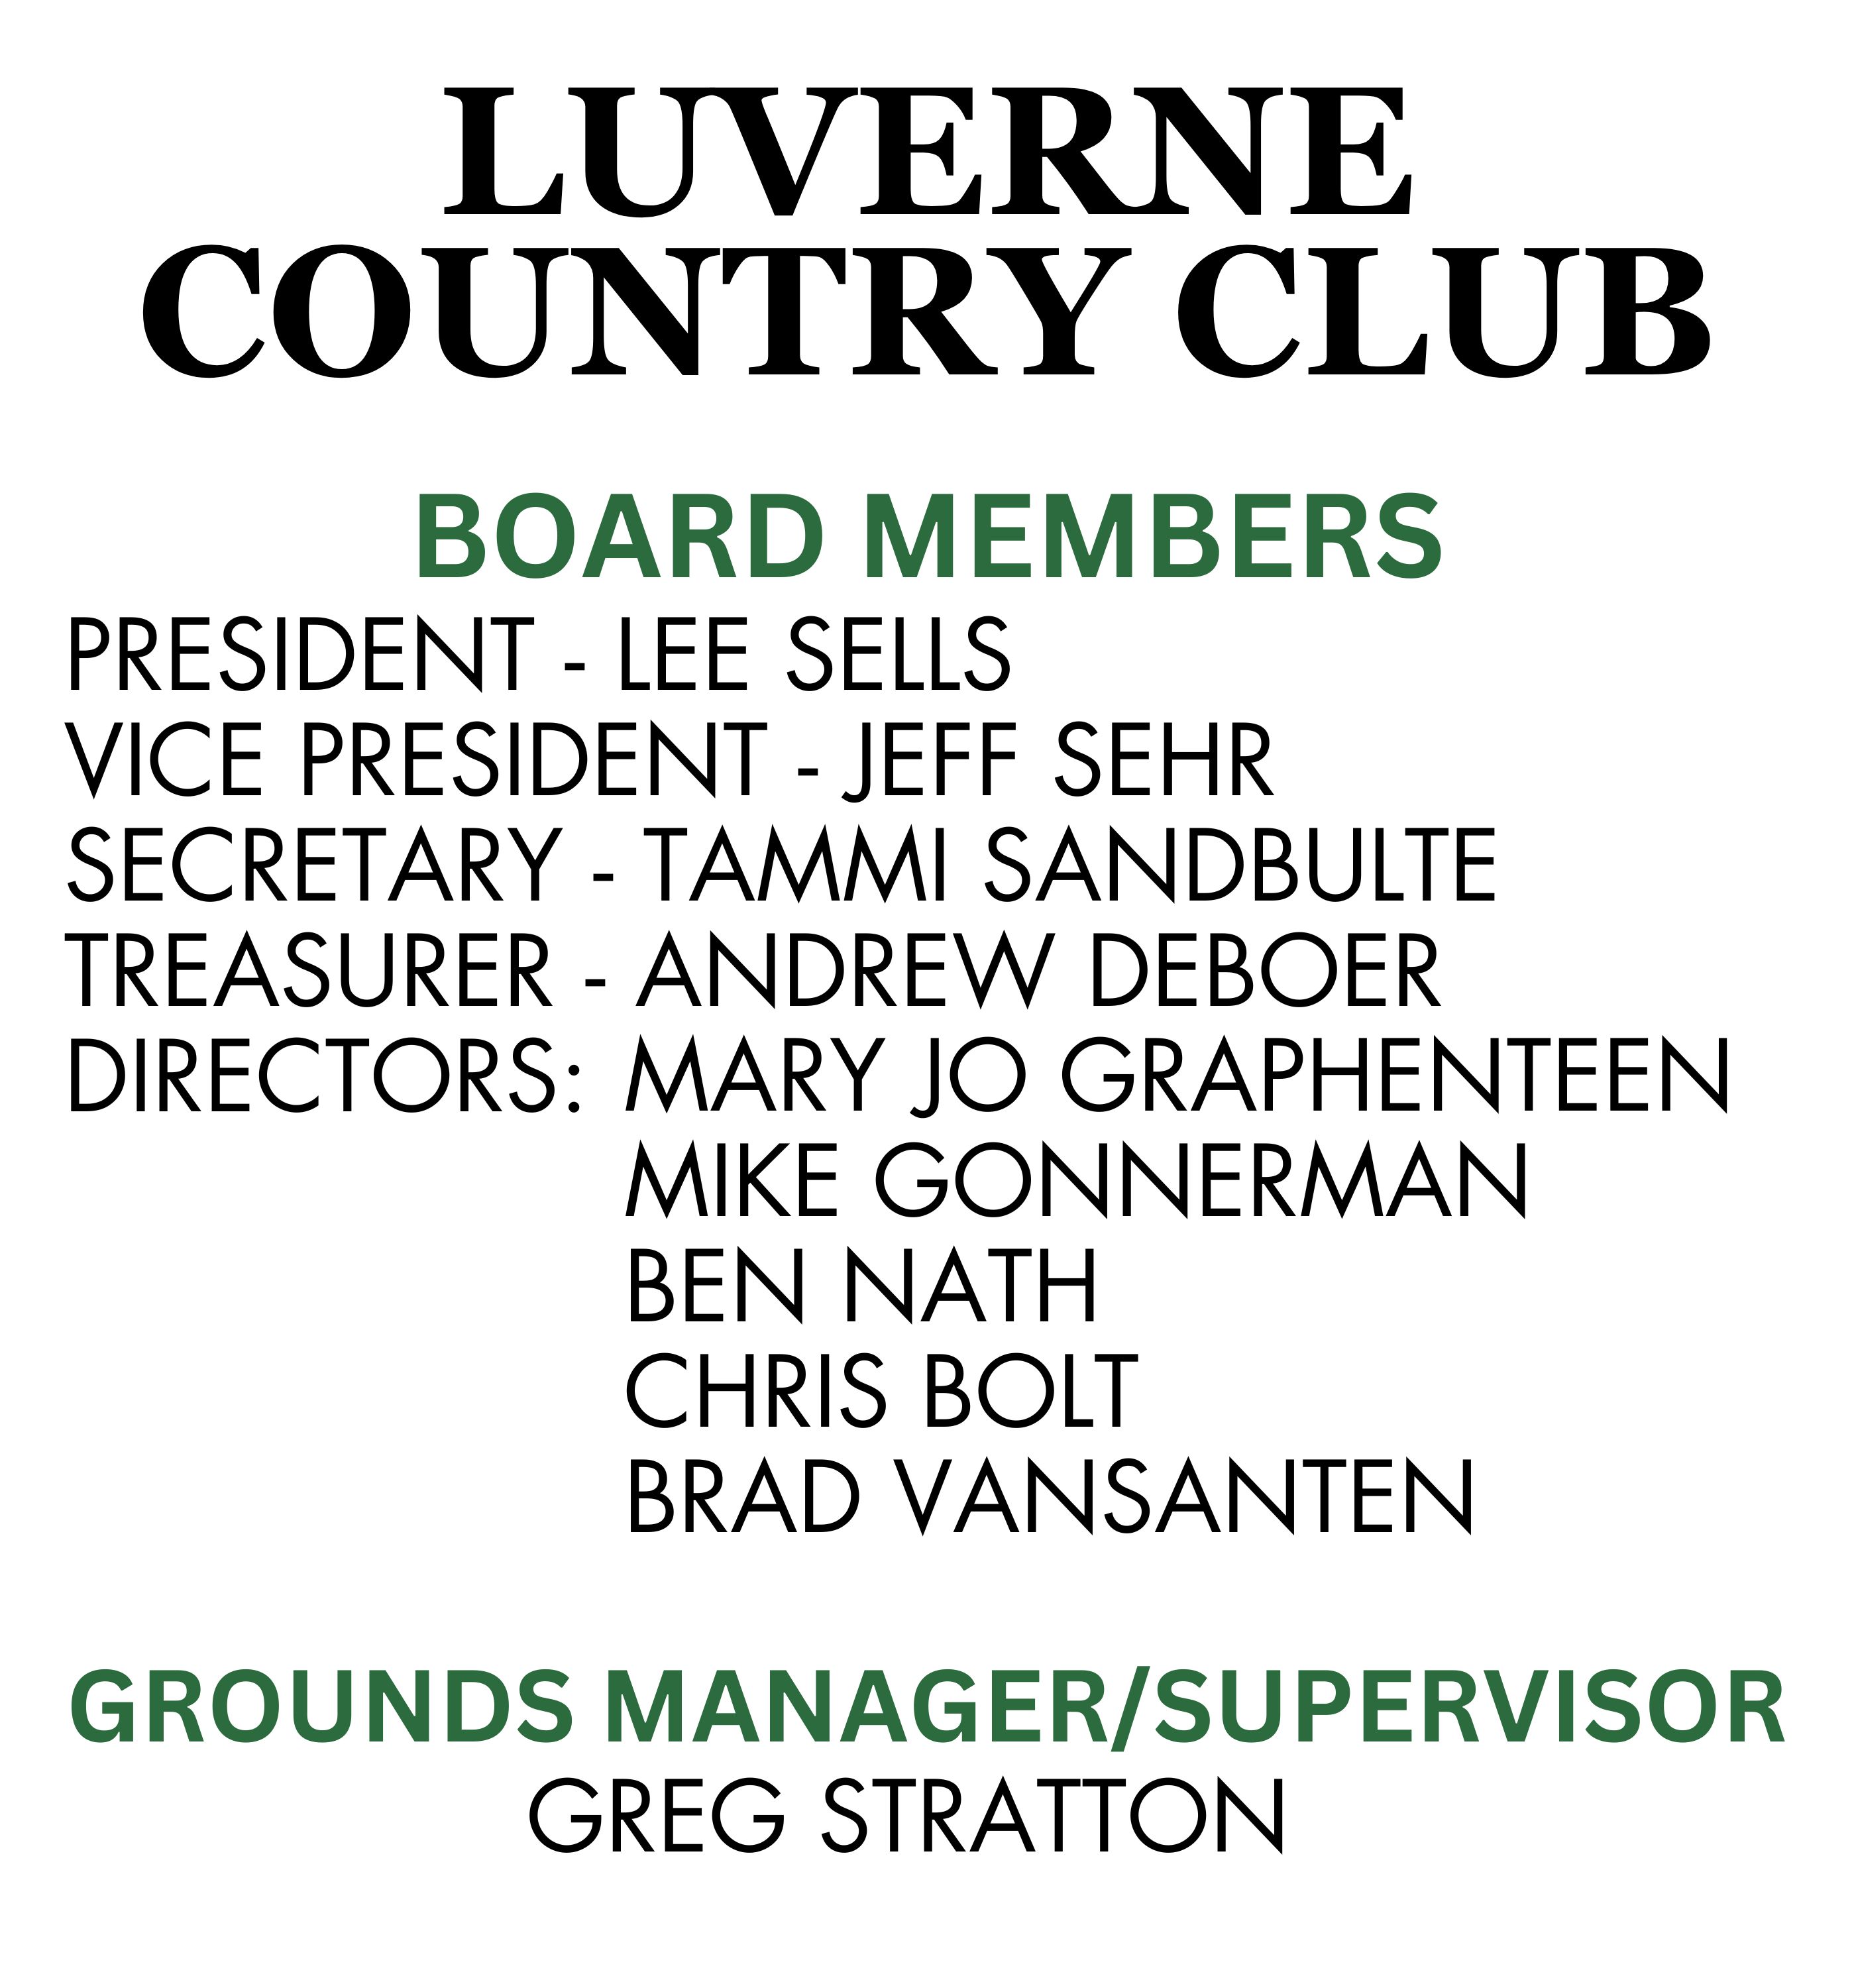 luverne country club board members